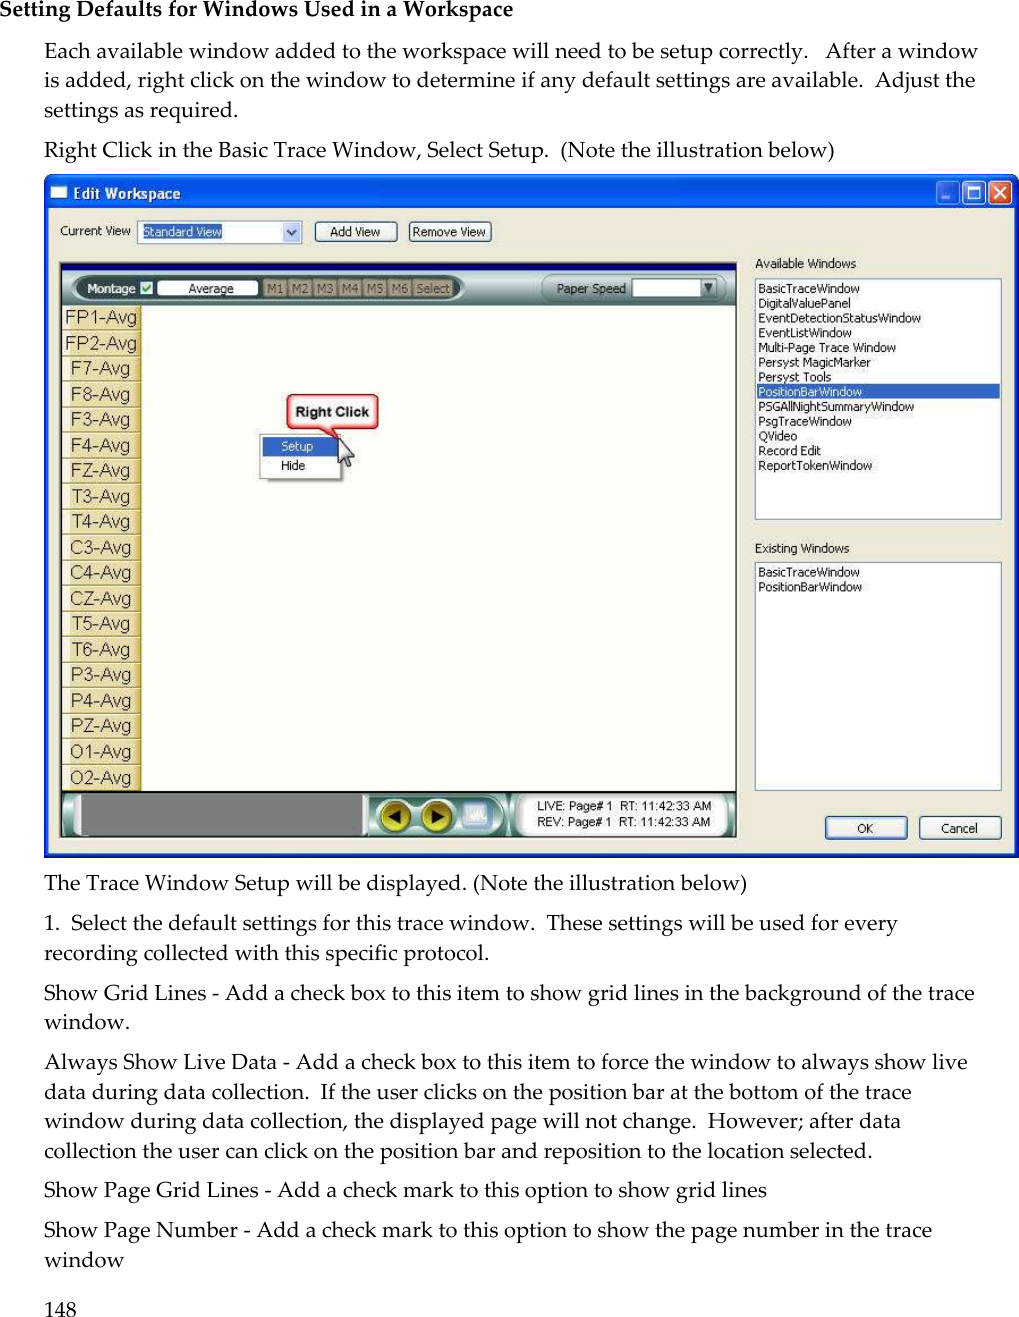 148   Setting Defaults for Windows Used in a Workspace Each available window added to the workspace will need to be setup correctly.   After a window is added, right click on the window to determine if any default settings are available.  Adjust the settings as required. Right Click in the Basic Trace Window, Select Setup.  (Note the illustration below)  The Trace Window Setup will be displayed. (Note the illustration below) 1.  Select the default settings for this trace window.  These settings will be used for every recording collected with this specific protocol. Show Grid Lines - Add a check box to this item to show grid lines in the background of the trace window. Always Show Live Data - Add a check box to this item to force the window to always show live data during data collection.  If the user clicks on the position bar at the bottom of the trace window during data collection, the displayed page will not change.  However; after data collection the user can click on the position bar and reposition to the location selected. Show Page Grid Lines - Add a check mark to this option to show grid lines Show Page Number - Add a check mark to this option to show the page number in the trace window 